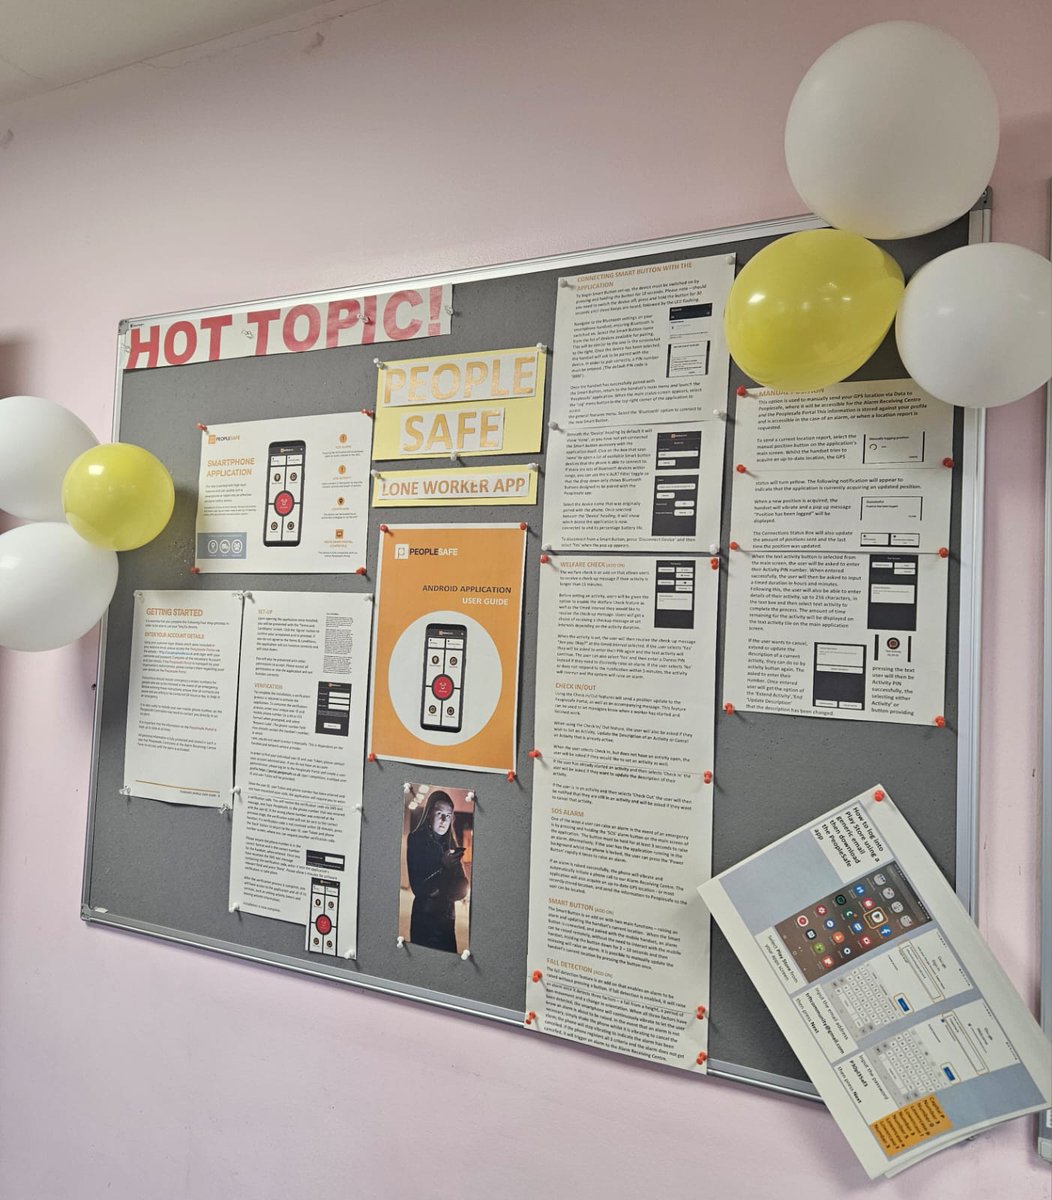 #CN #DN #TRFTCommuniTeam raising awareness of #PeopleSafe app looking after our staff @RotherhamNHS_FT